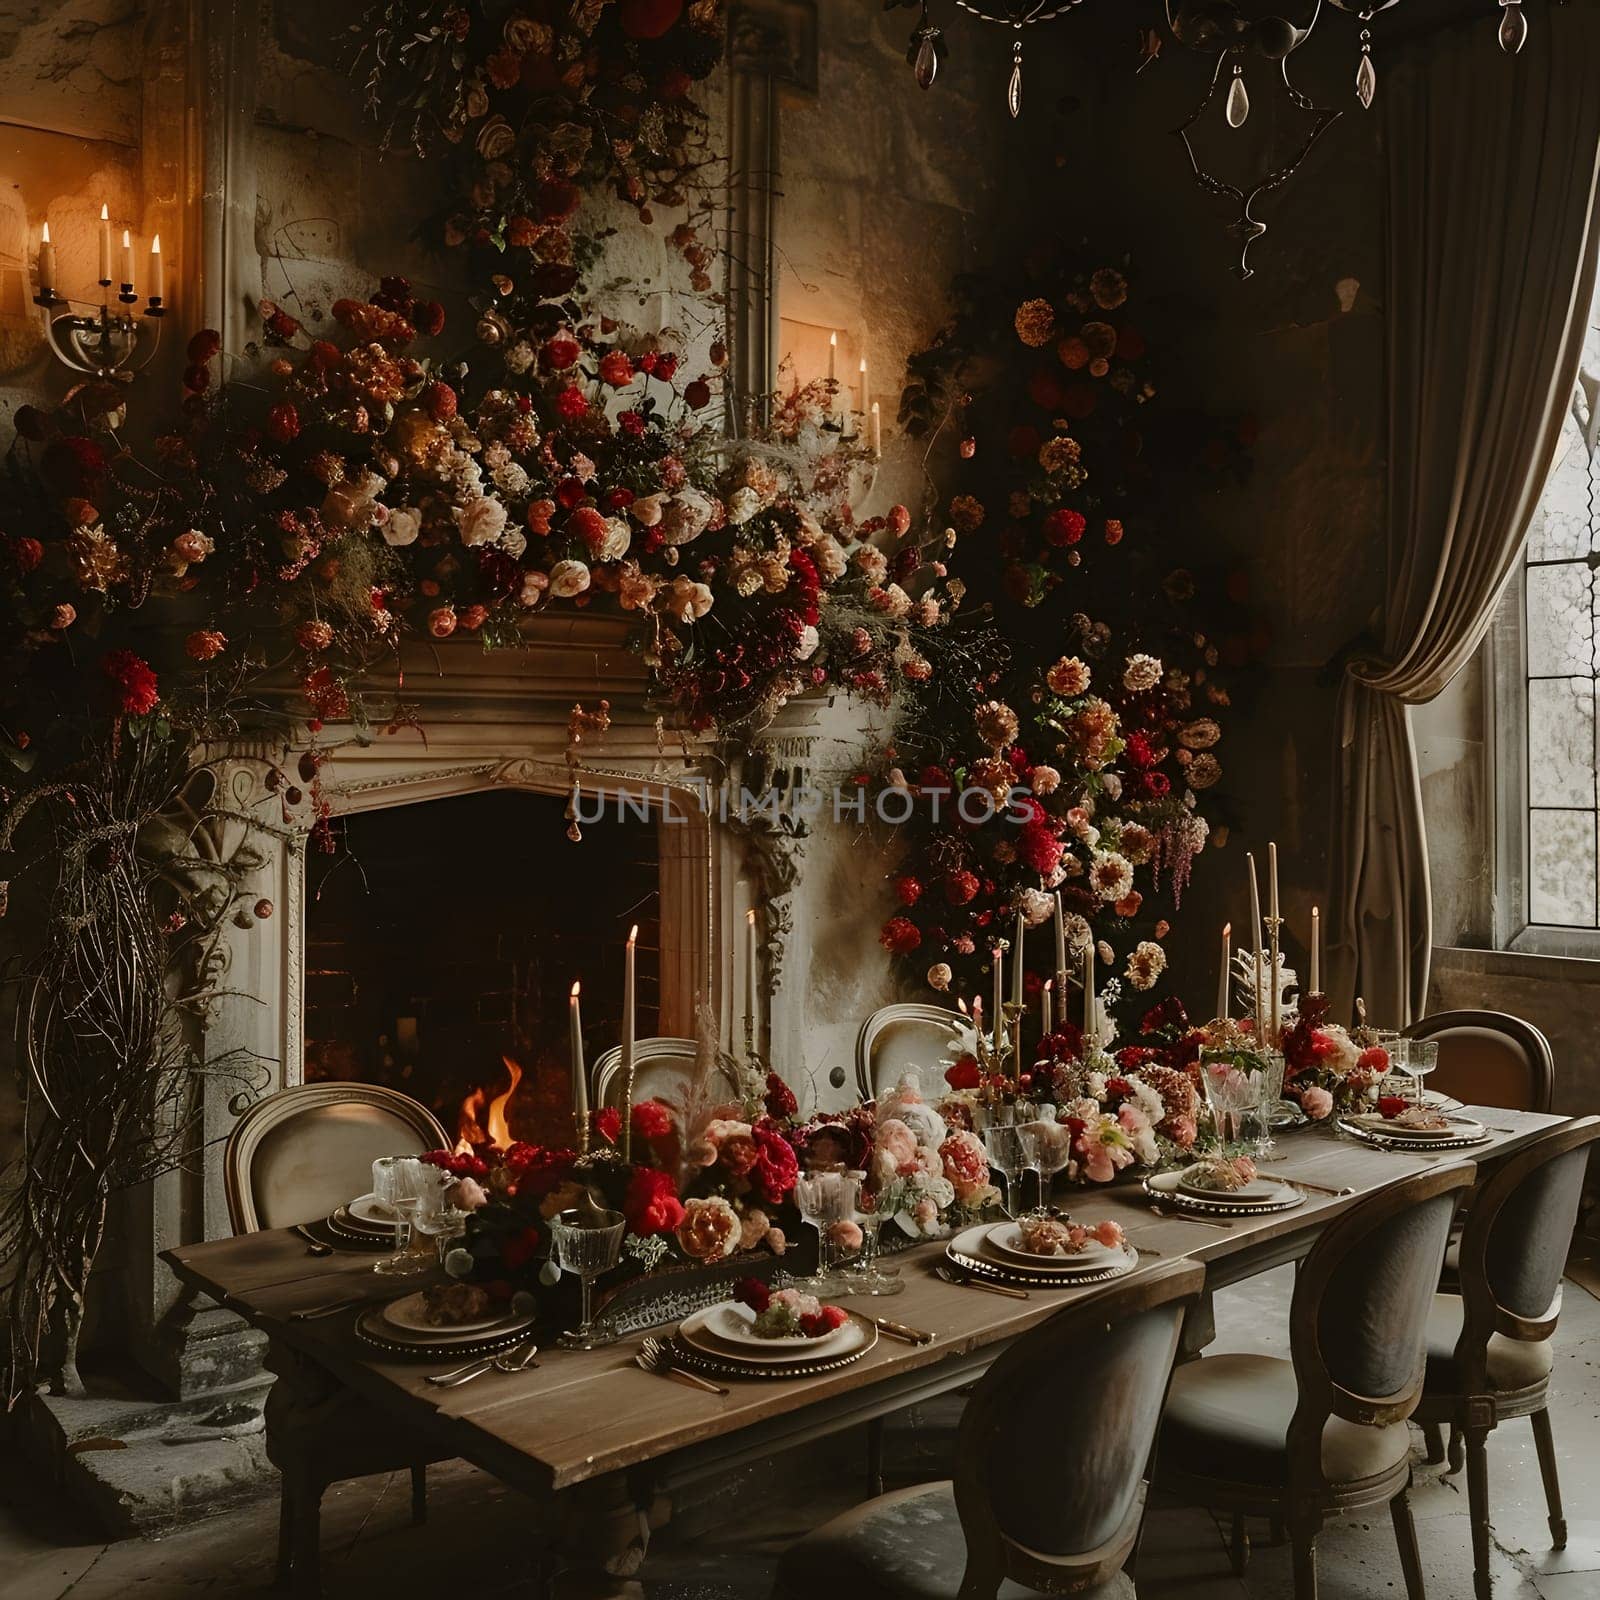 The dining room in the building is beautifully decorated with a table, chairs, and a fireplace adorned with flowers. The interior design also includes art, curtains, and a tablecloth for events